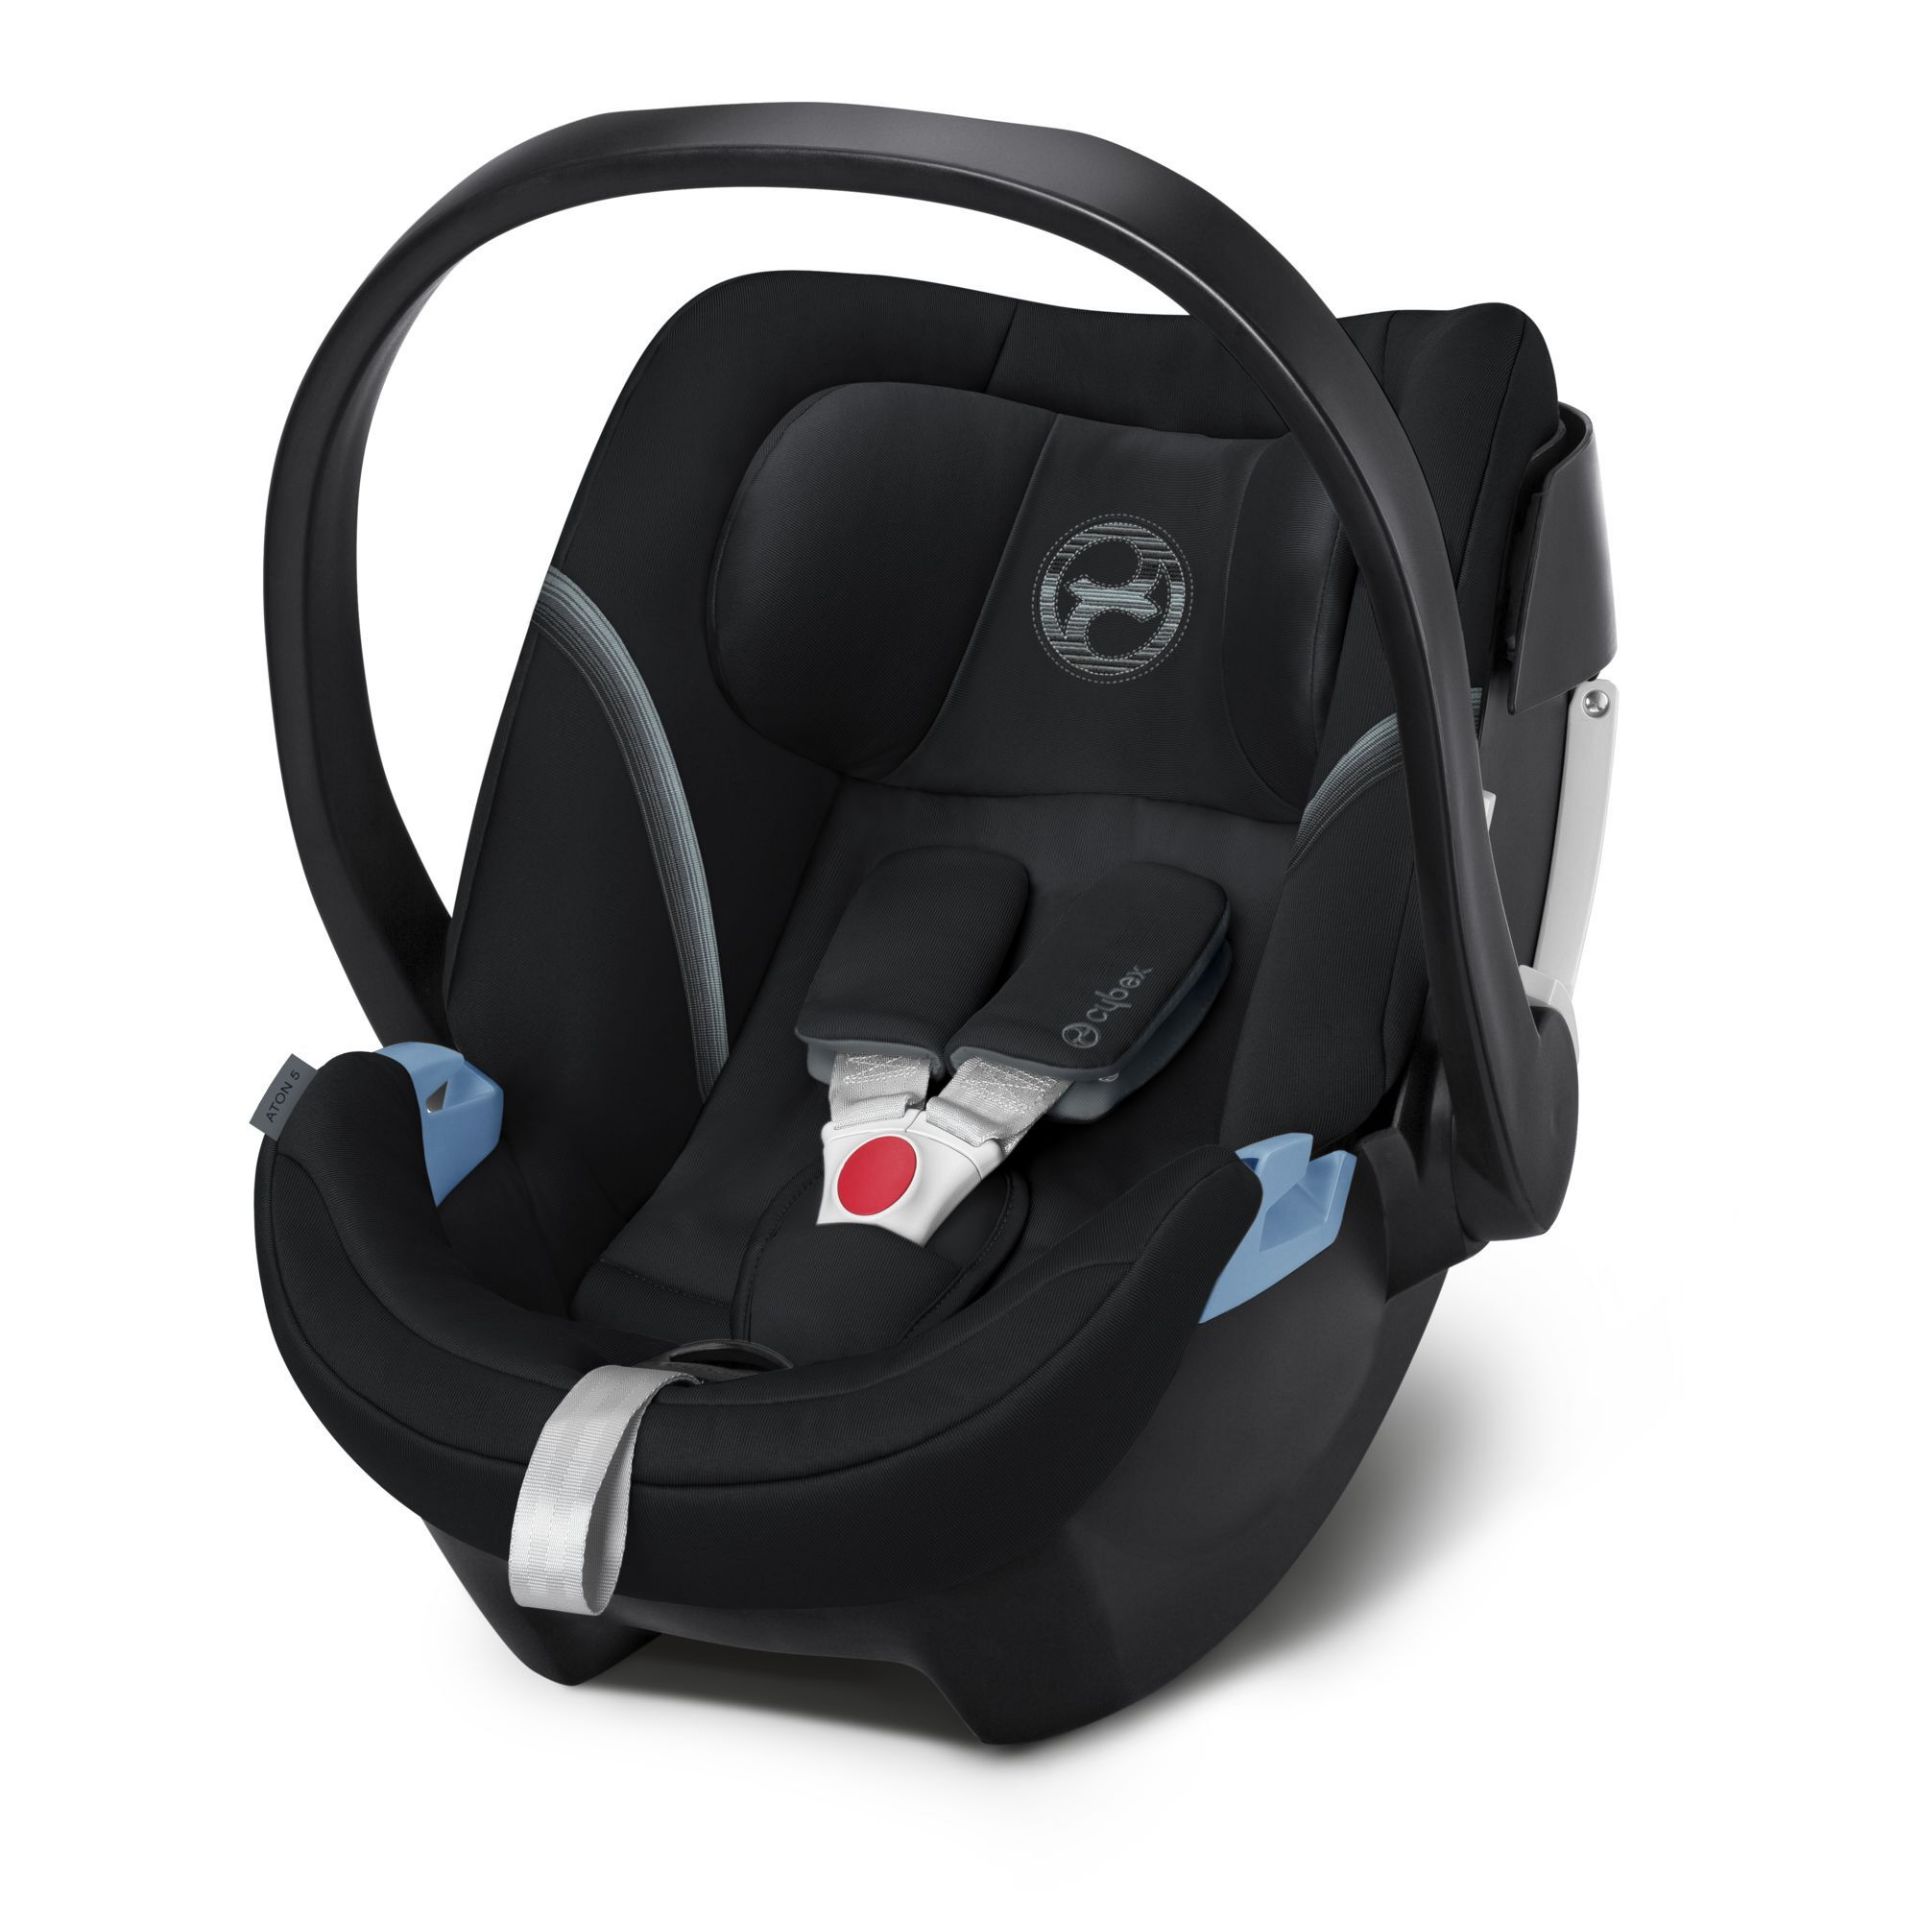 CYBEX ATON 5 INFANT CAR SEAT IN BLACK - RRP £149